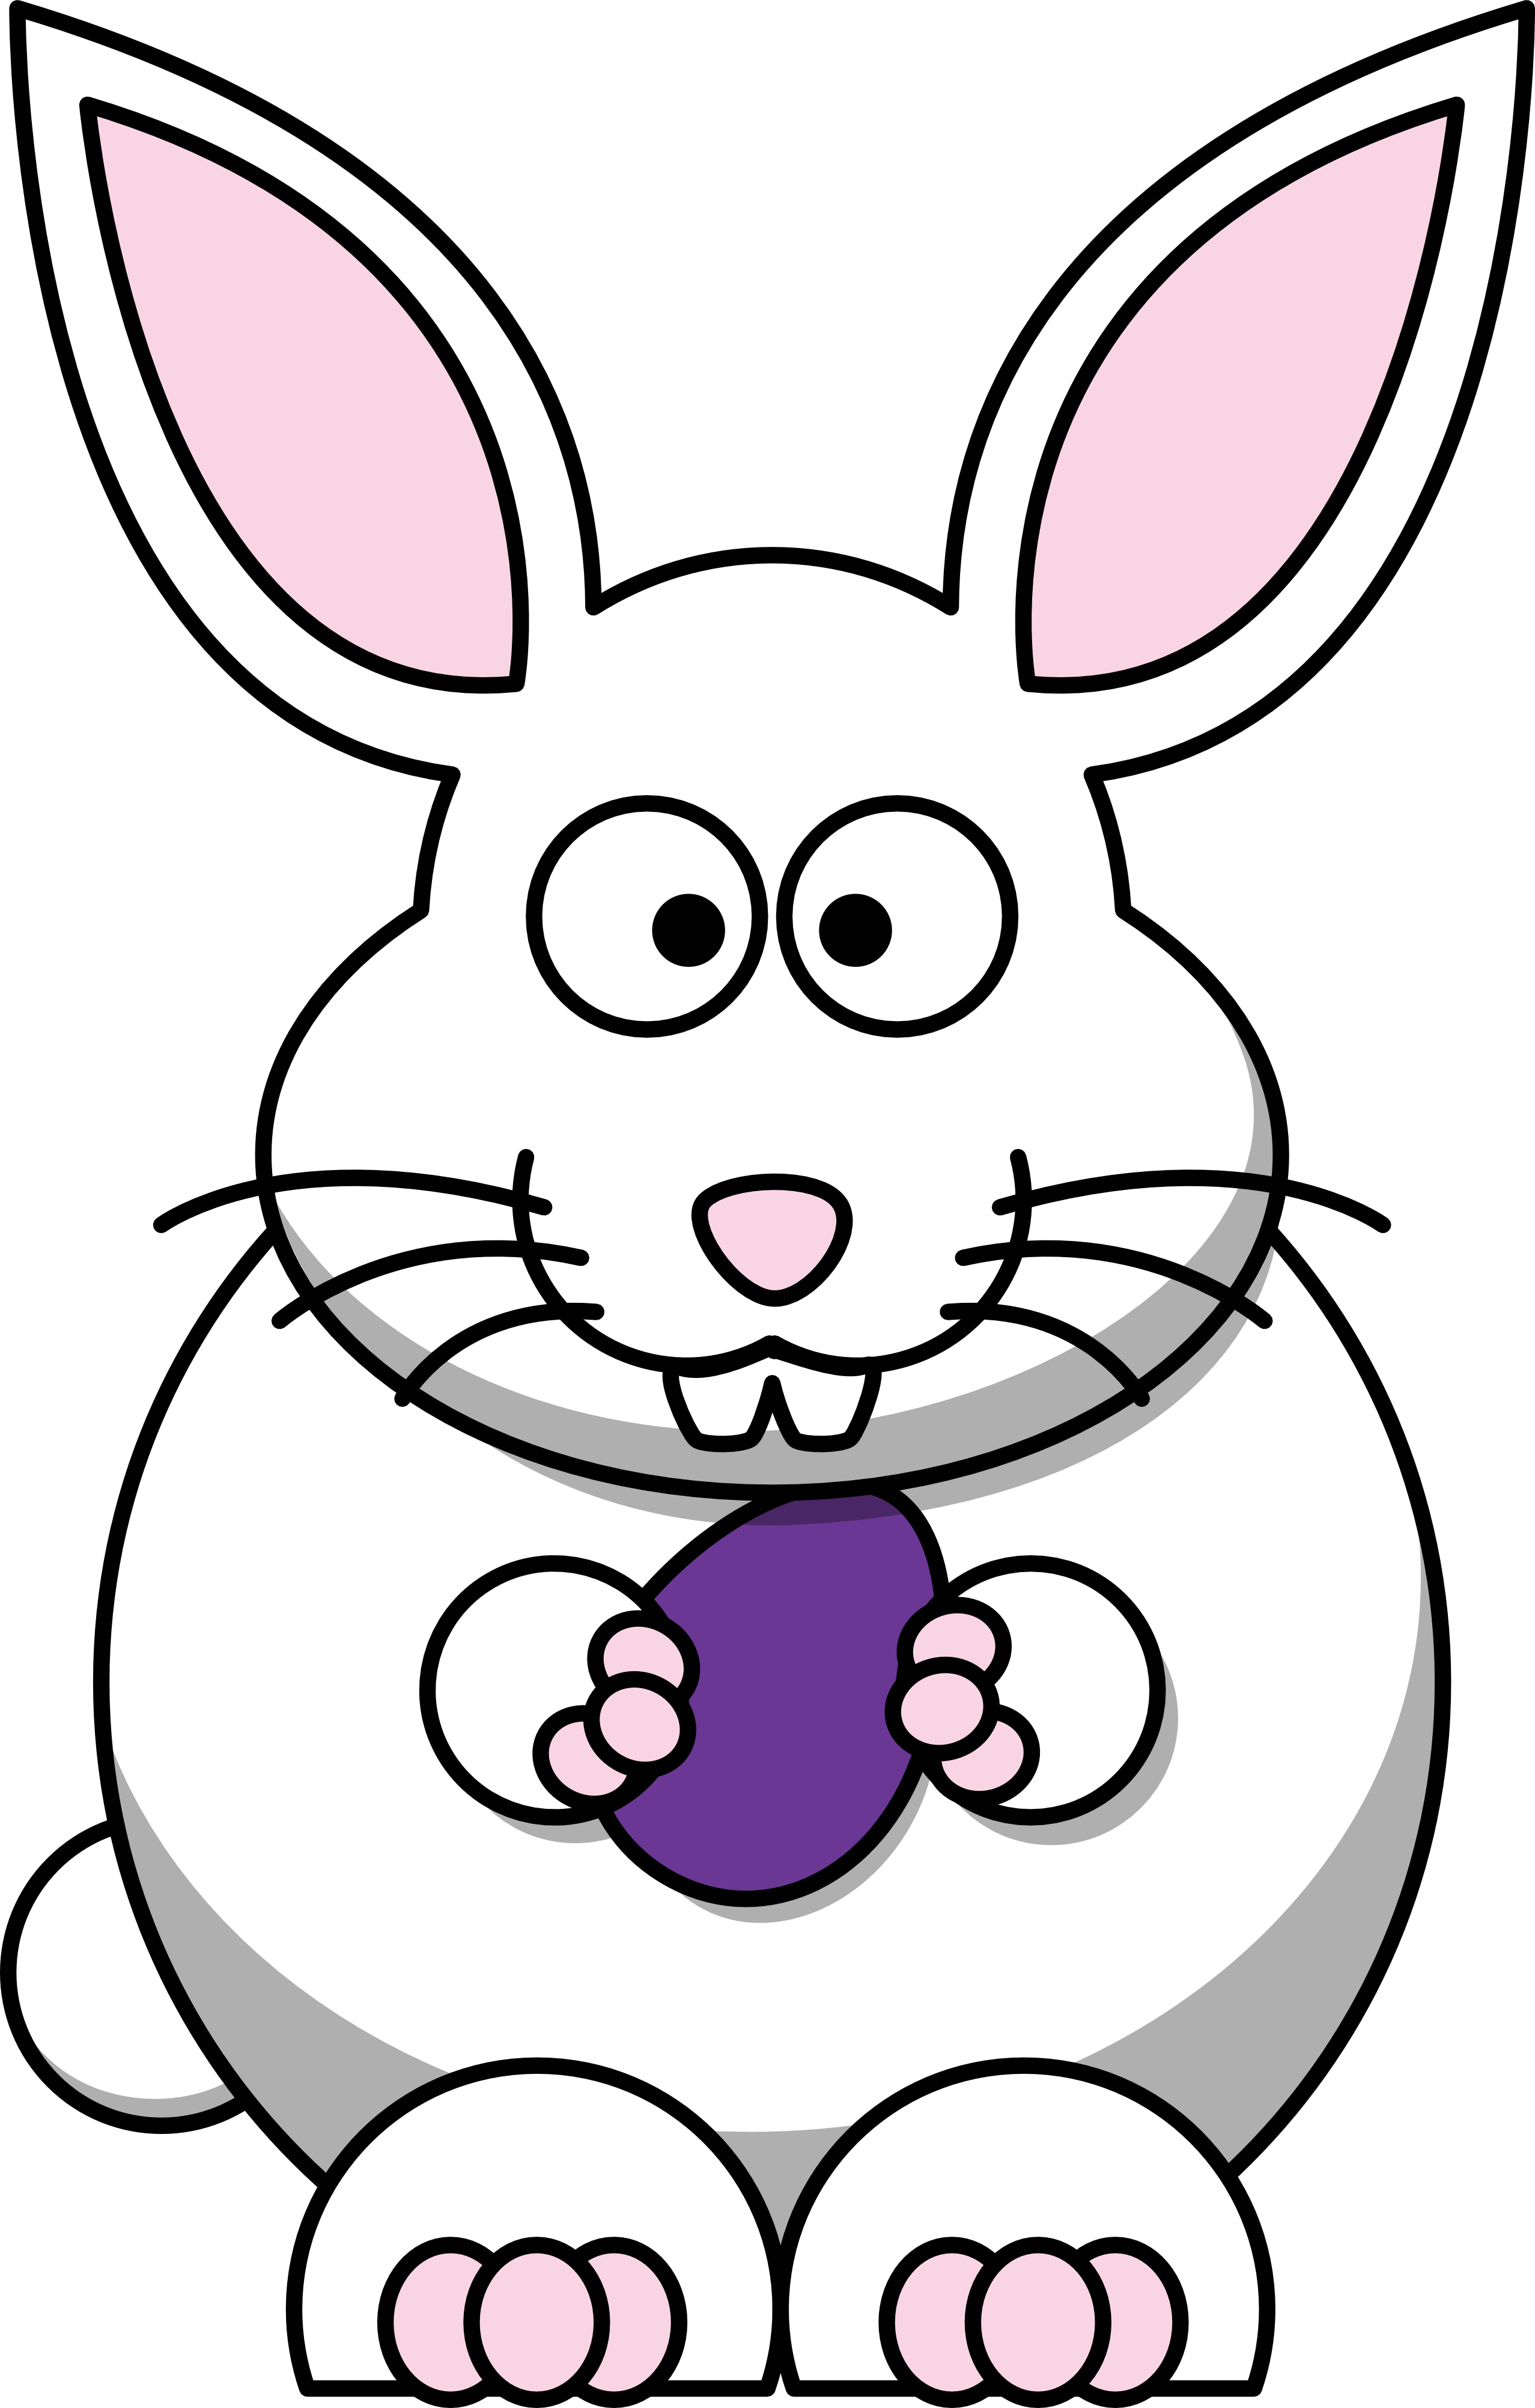 Pictures Of Cartoon Bunnies - Clipart library